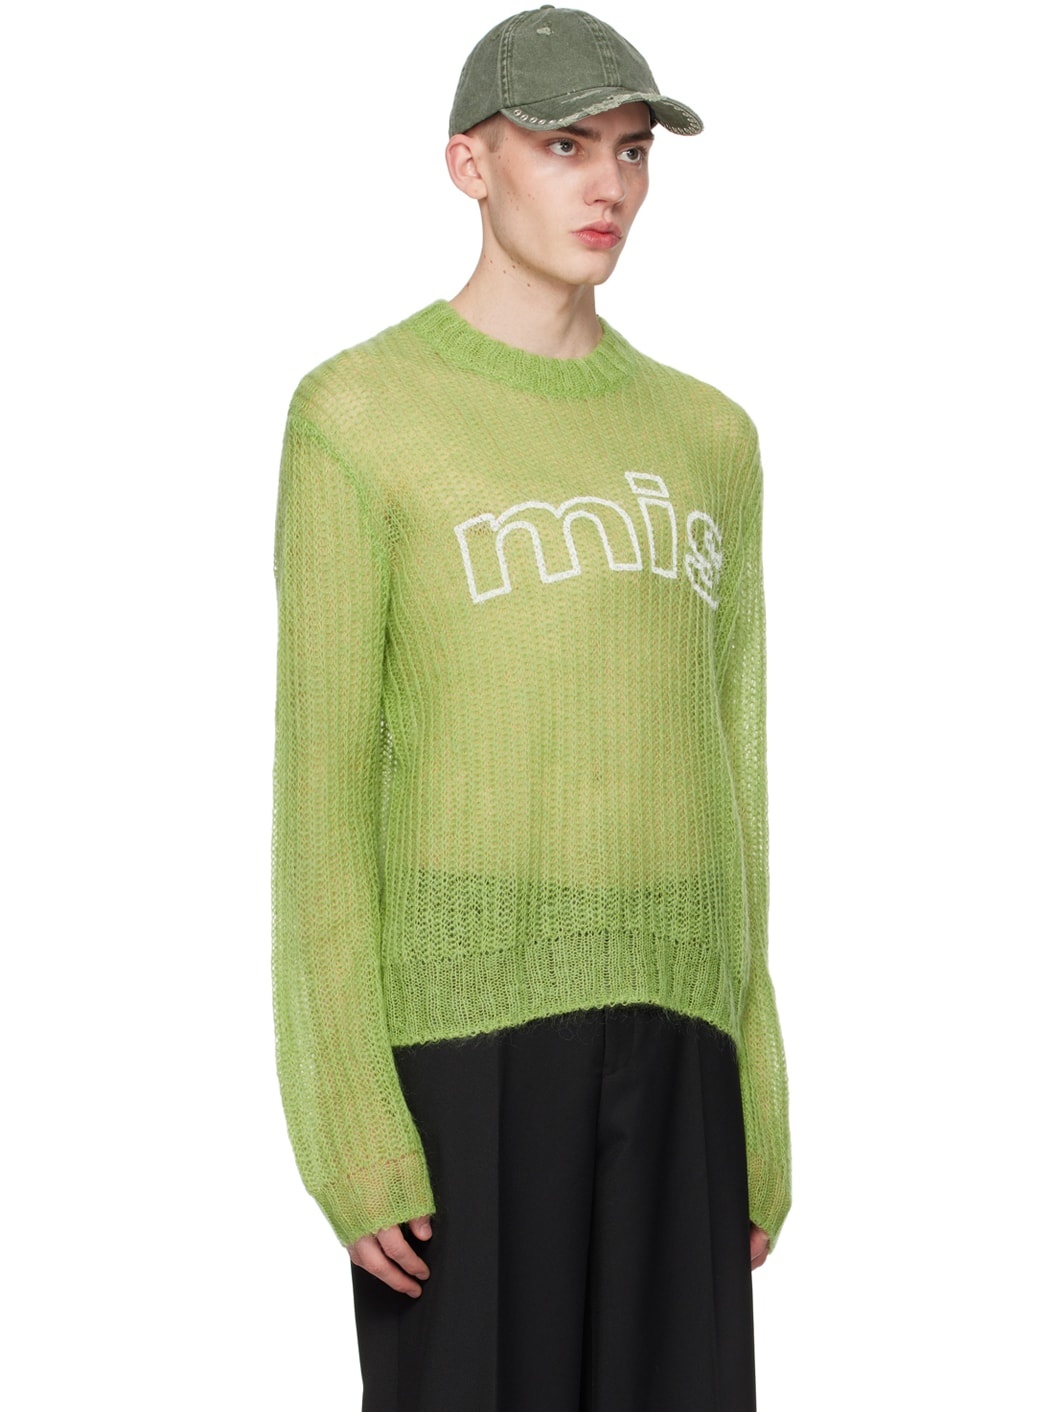 Green Unbrushed Sweater - 2